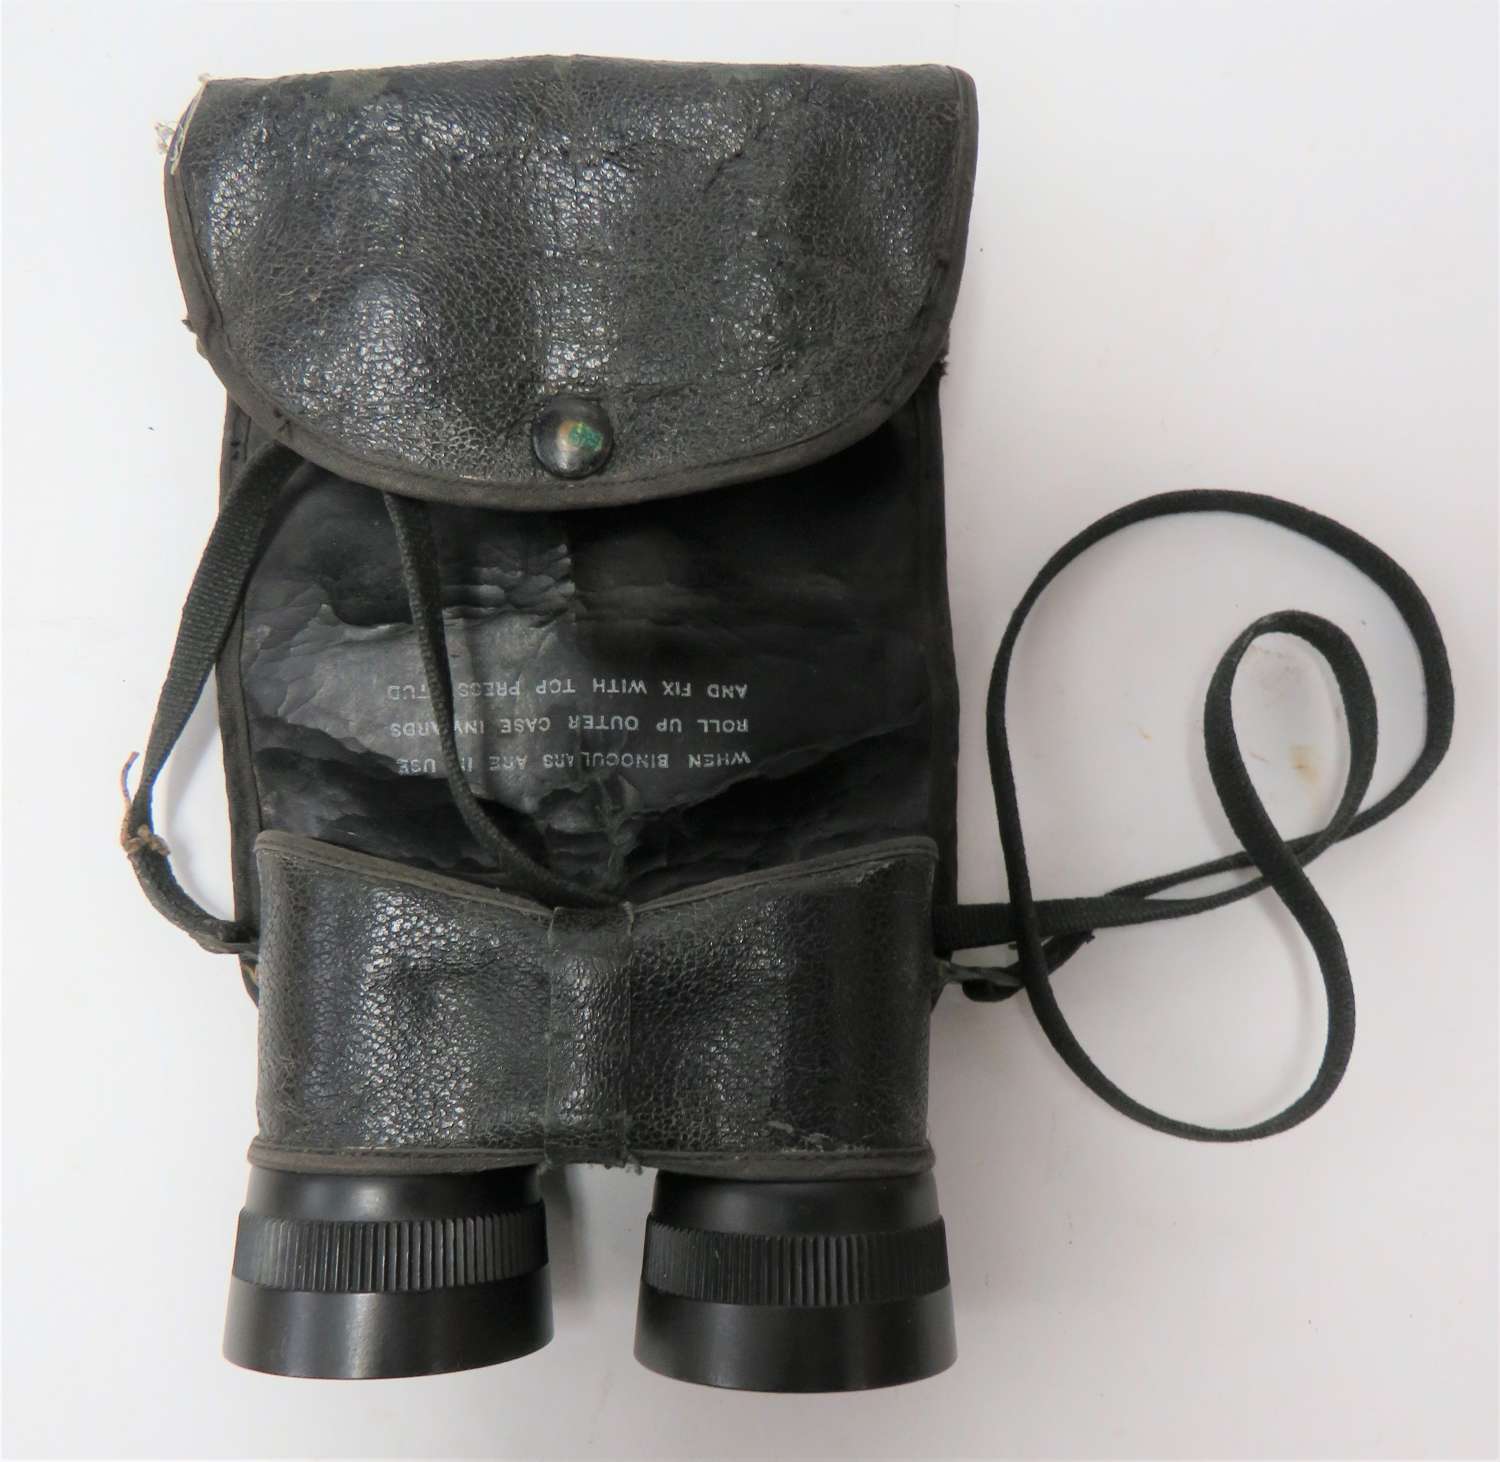 Rare Combined Operations & Special Forces Binoculars